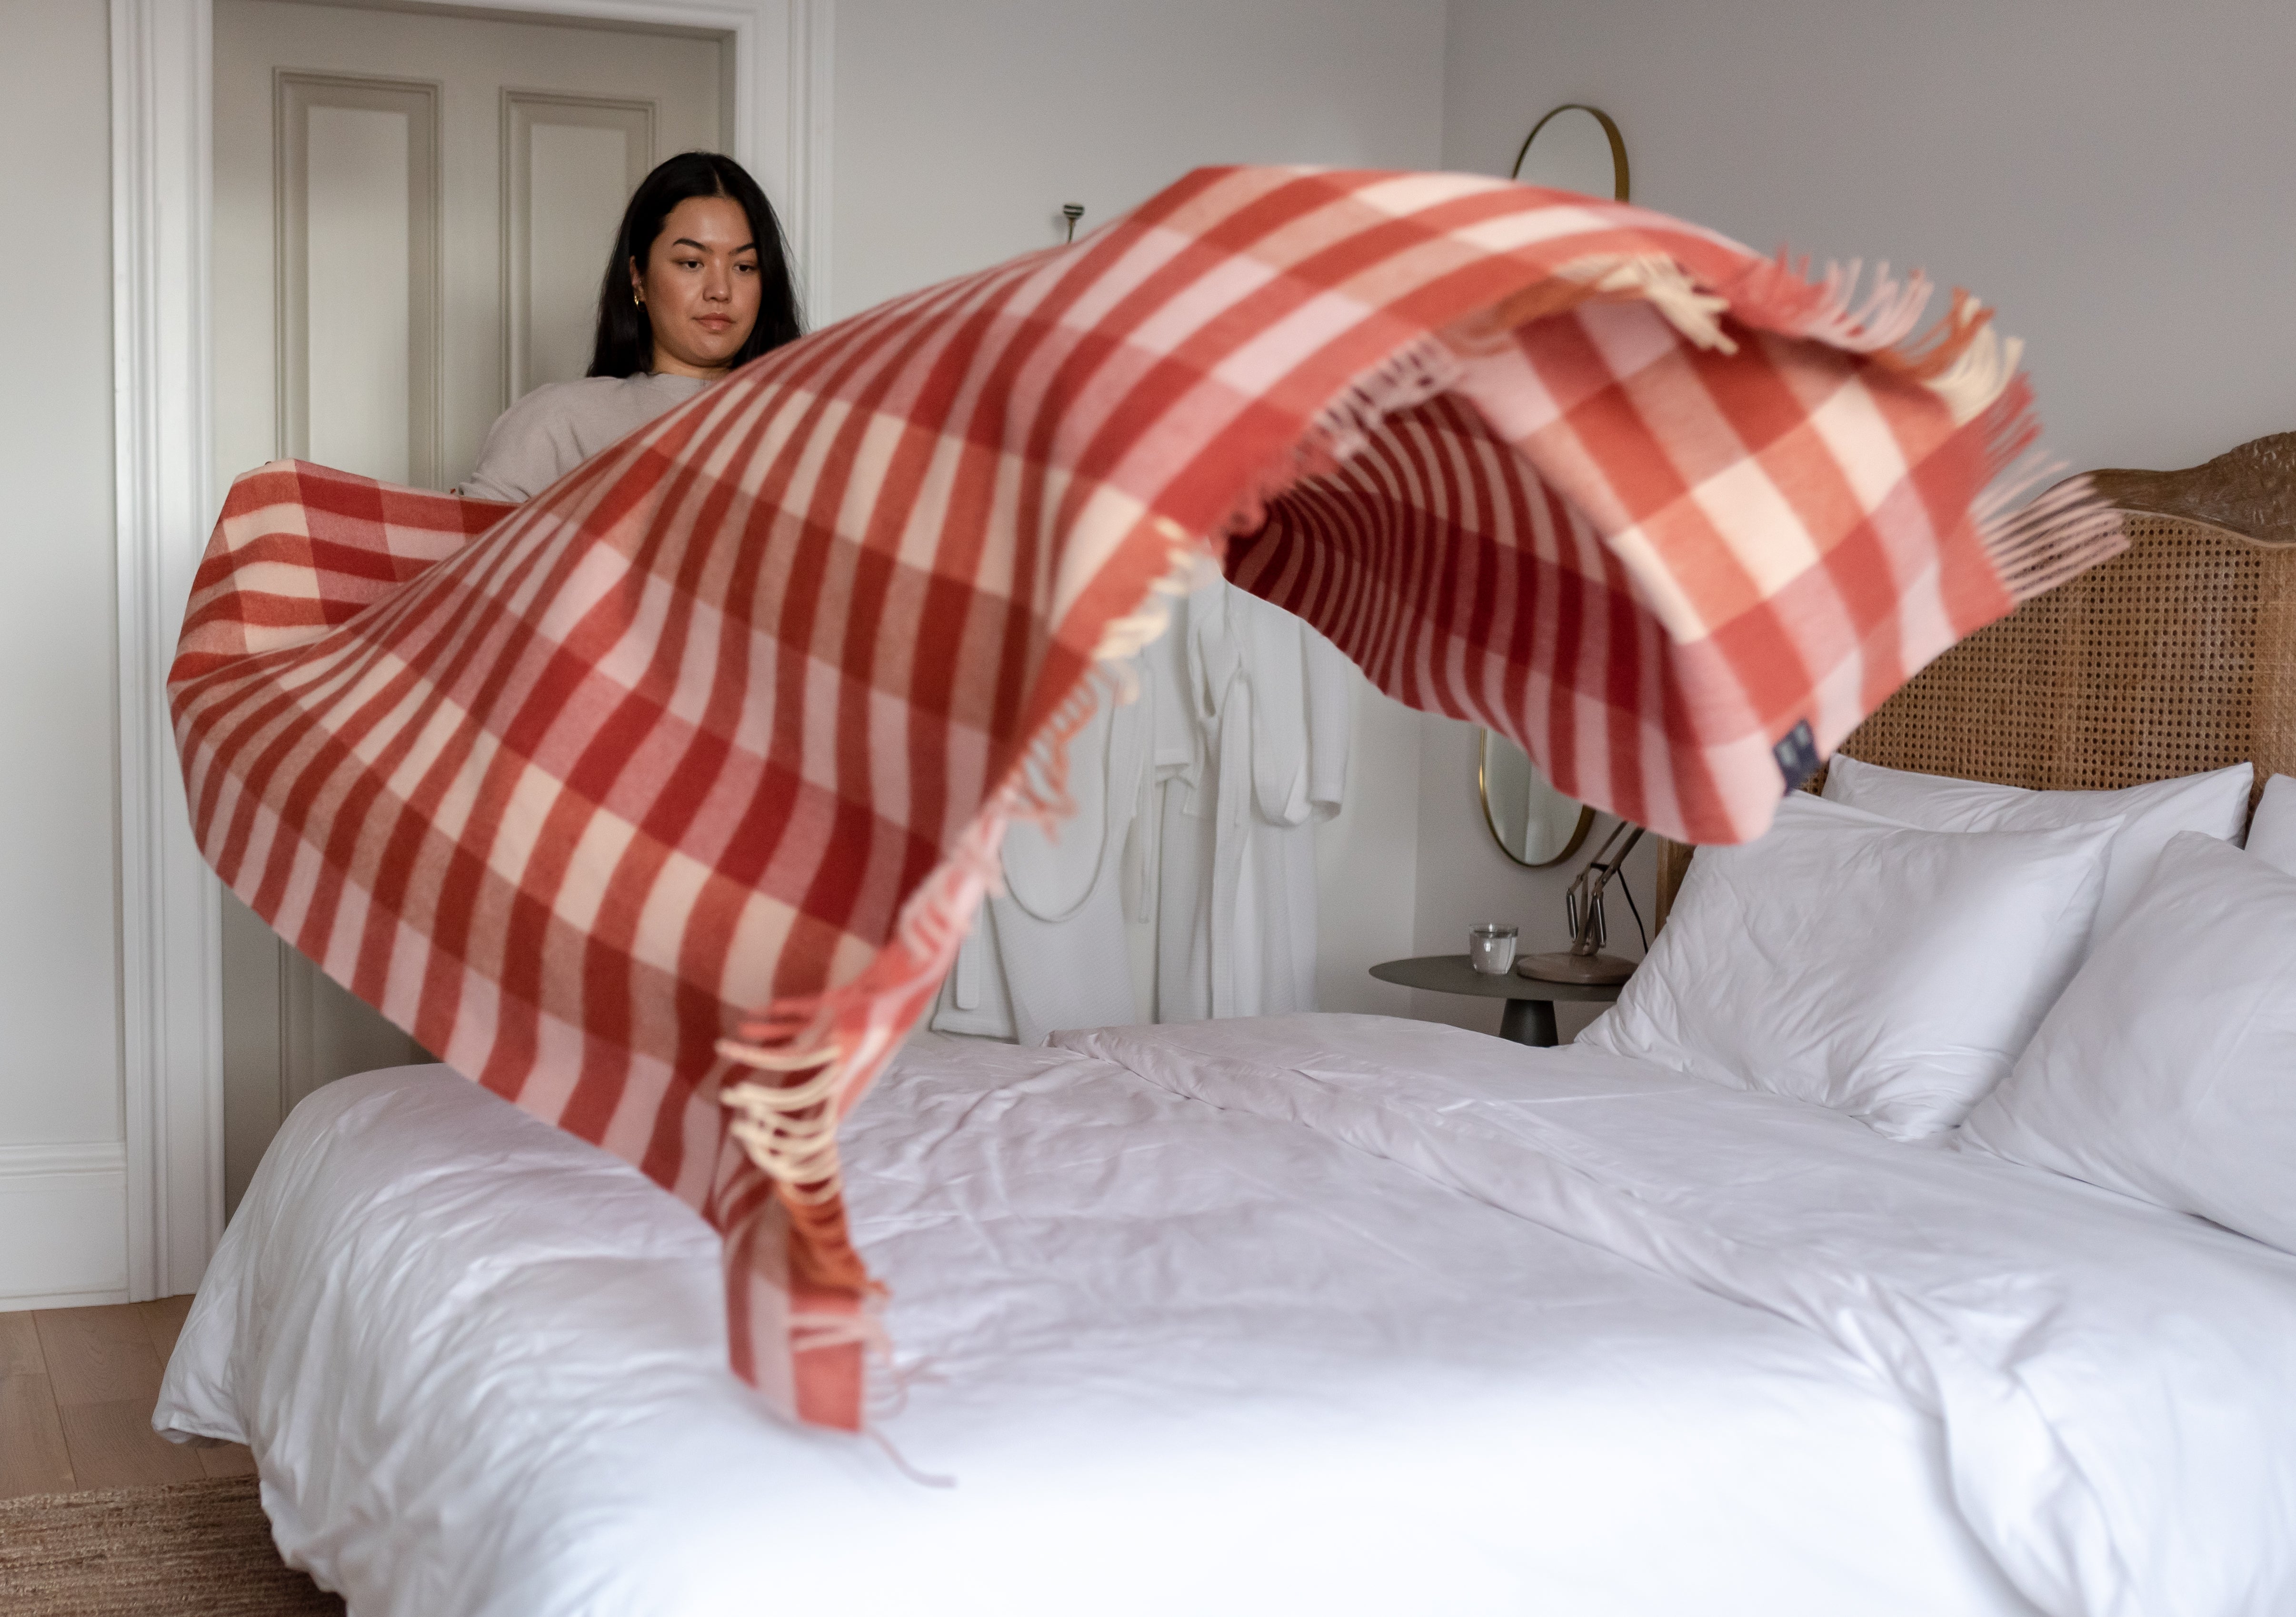 A girl making the bed and draping a blanket across it in hopes of getting a good night's sleep